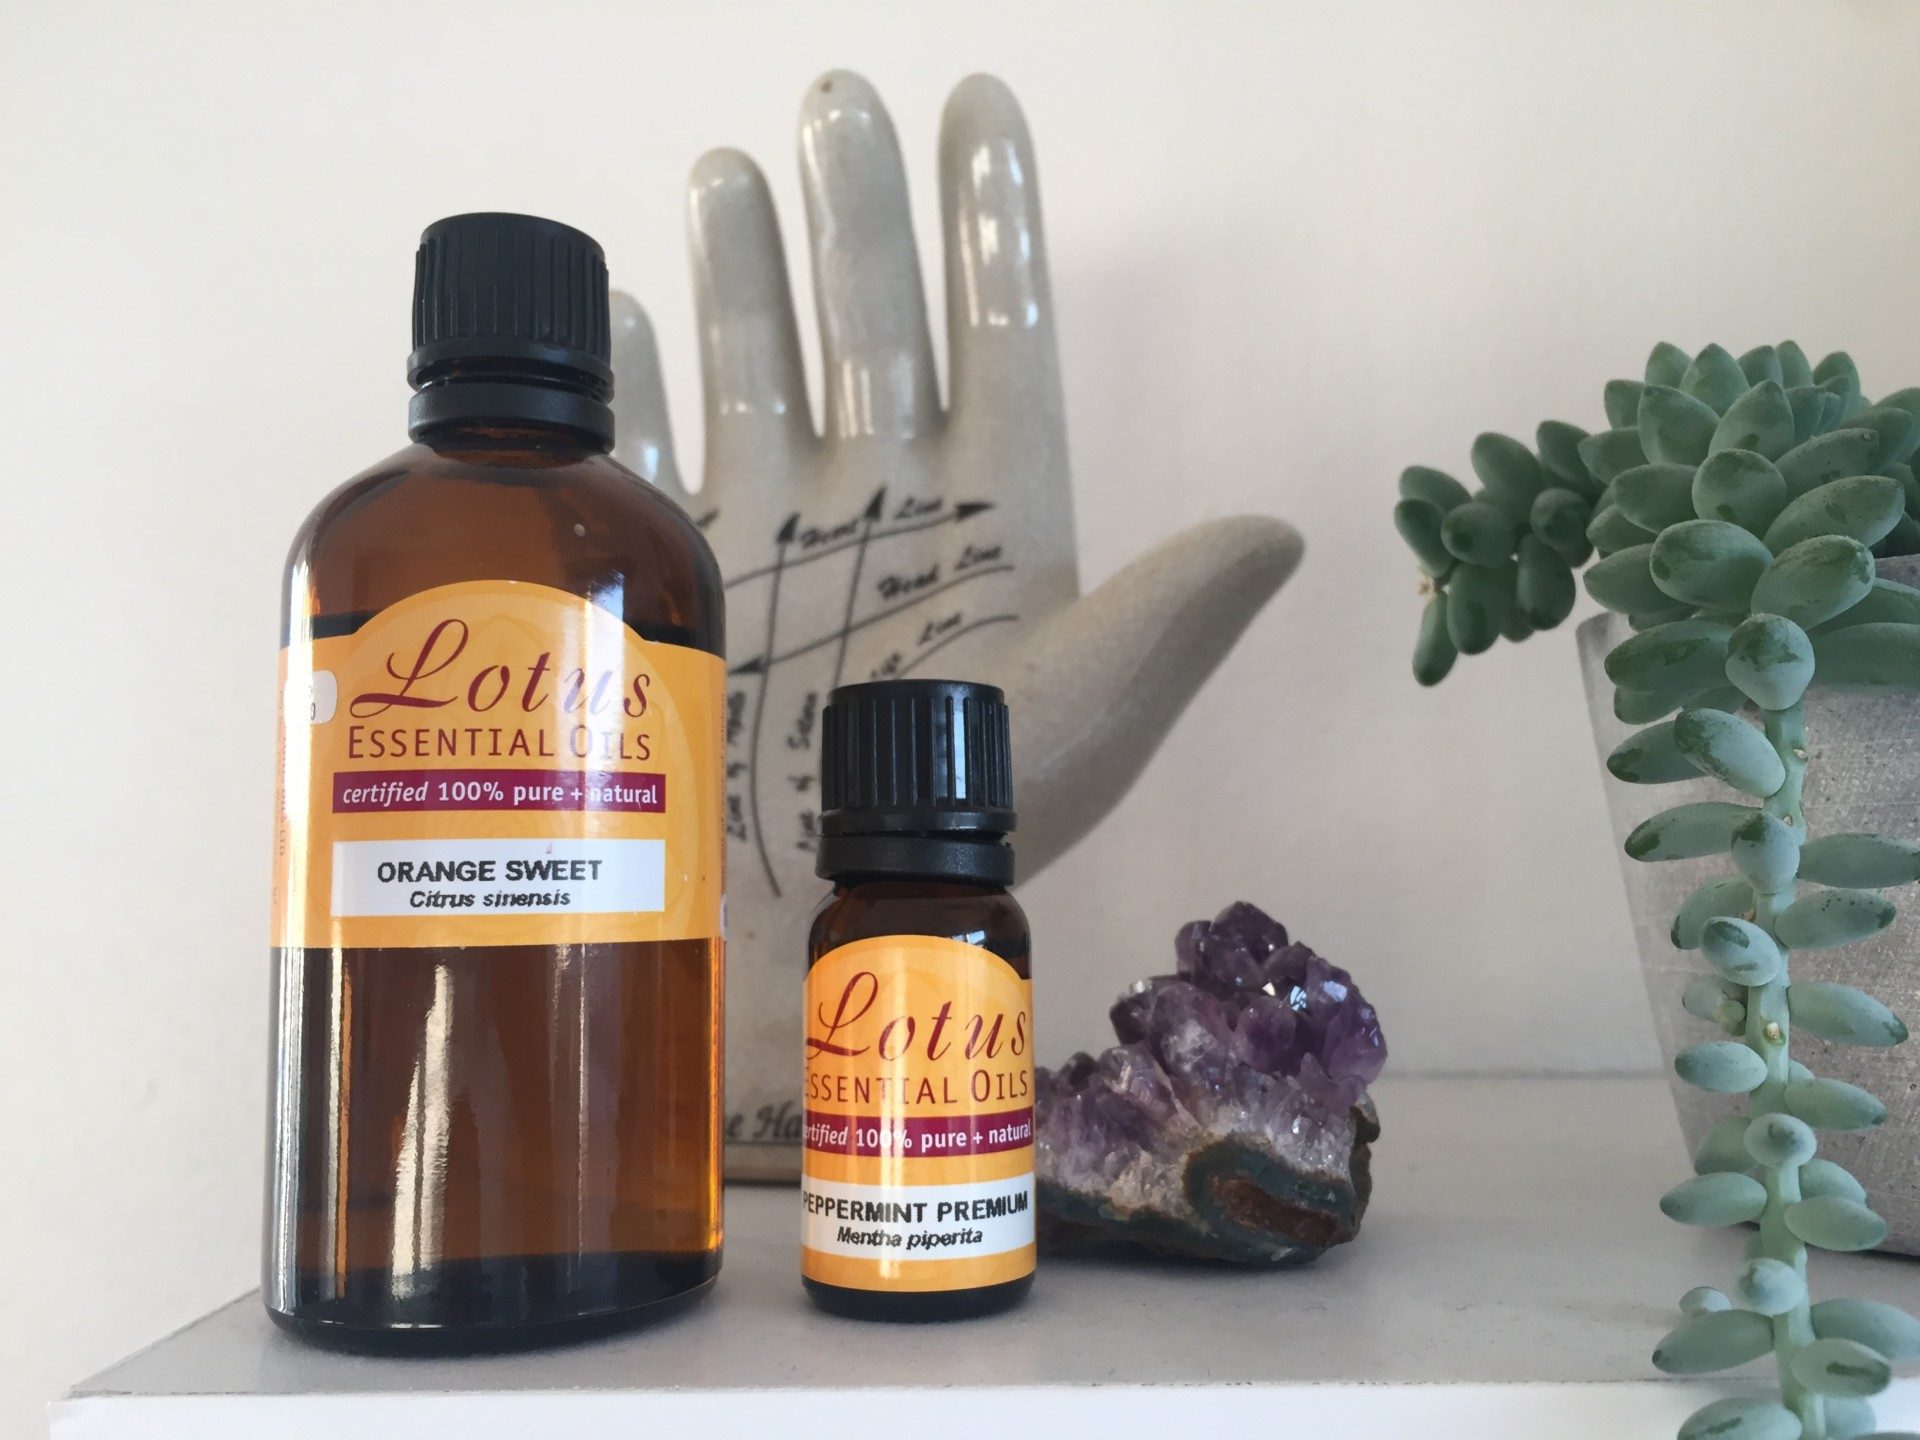 How to wake up earlier and enjoy it - using essential oils to wake up